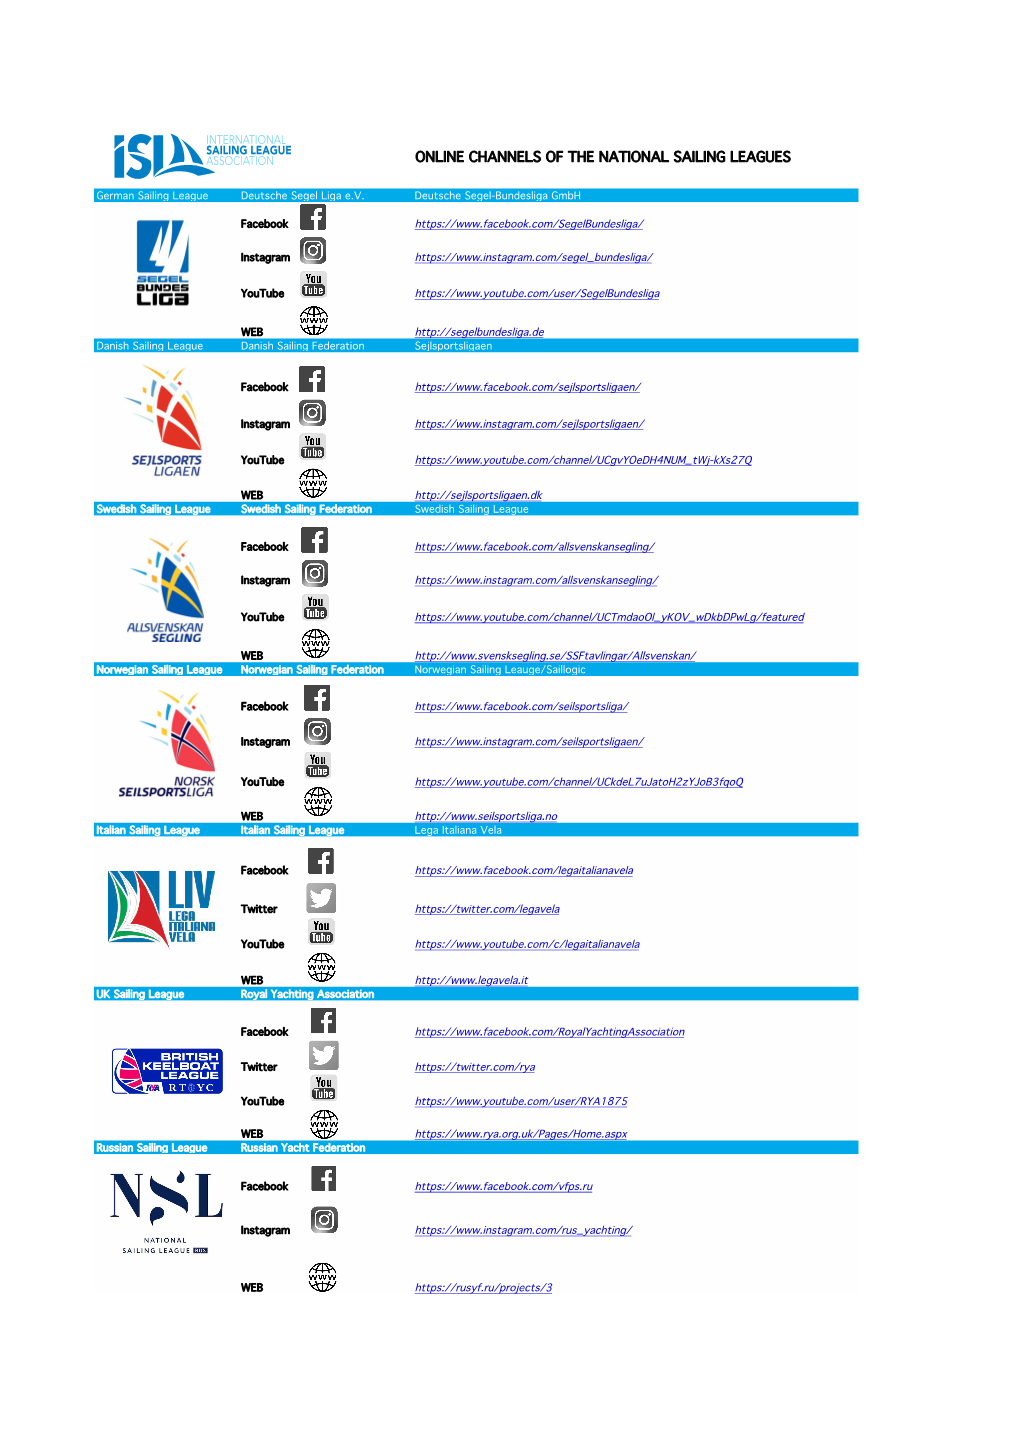 Online Channels of the National Sailing Leagues